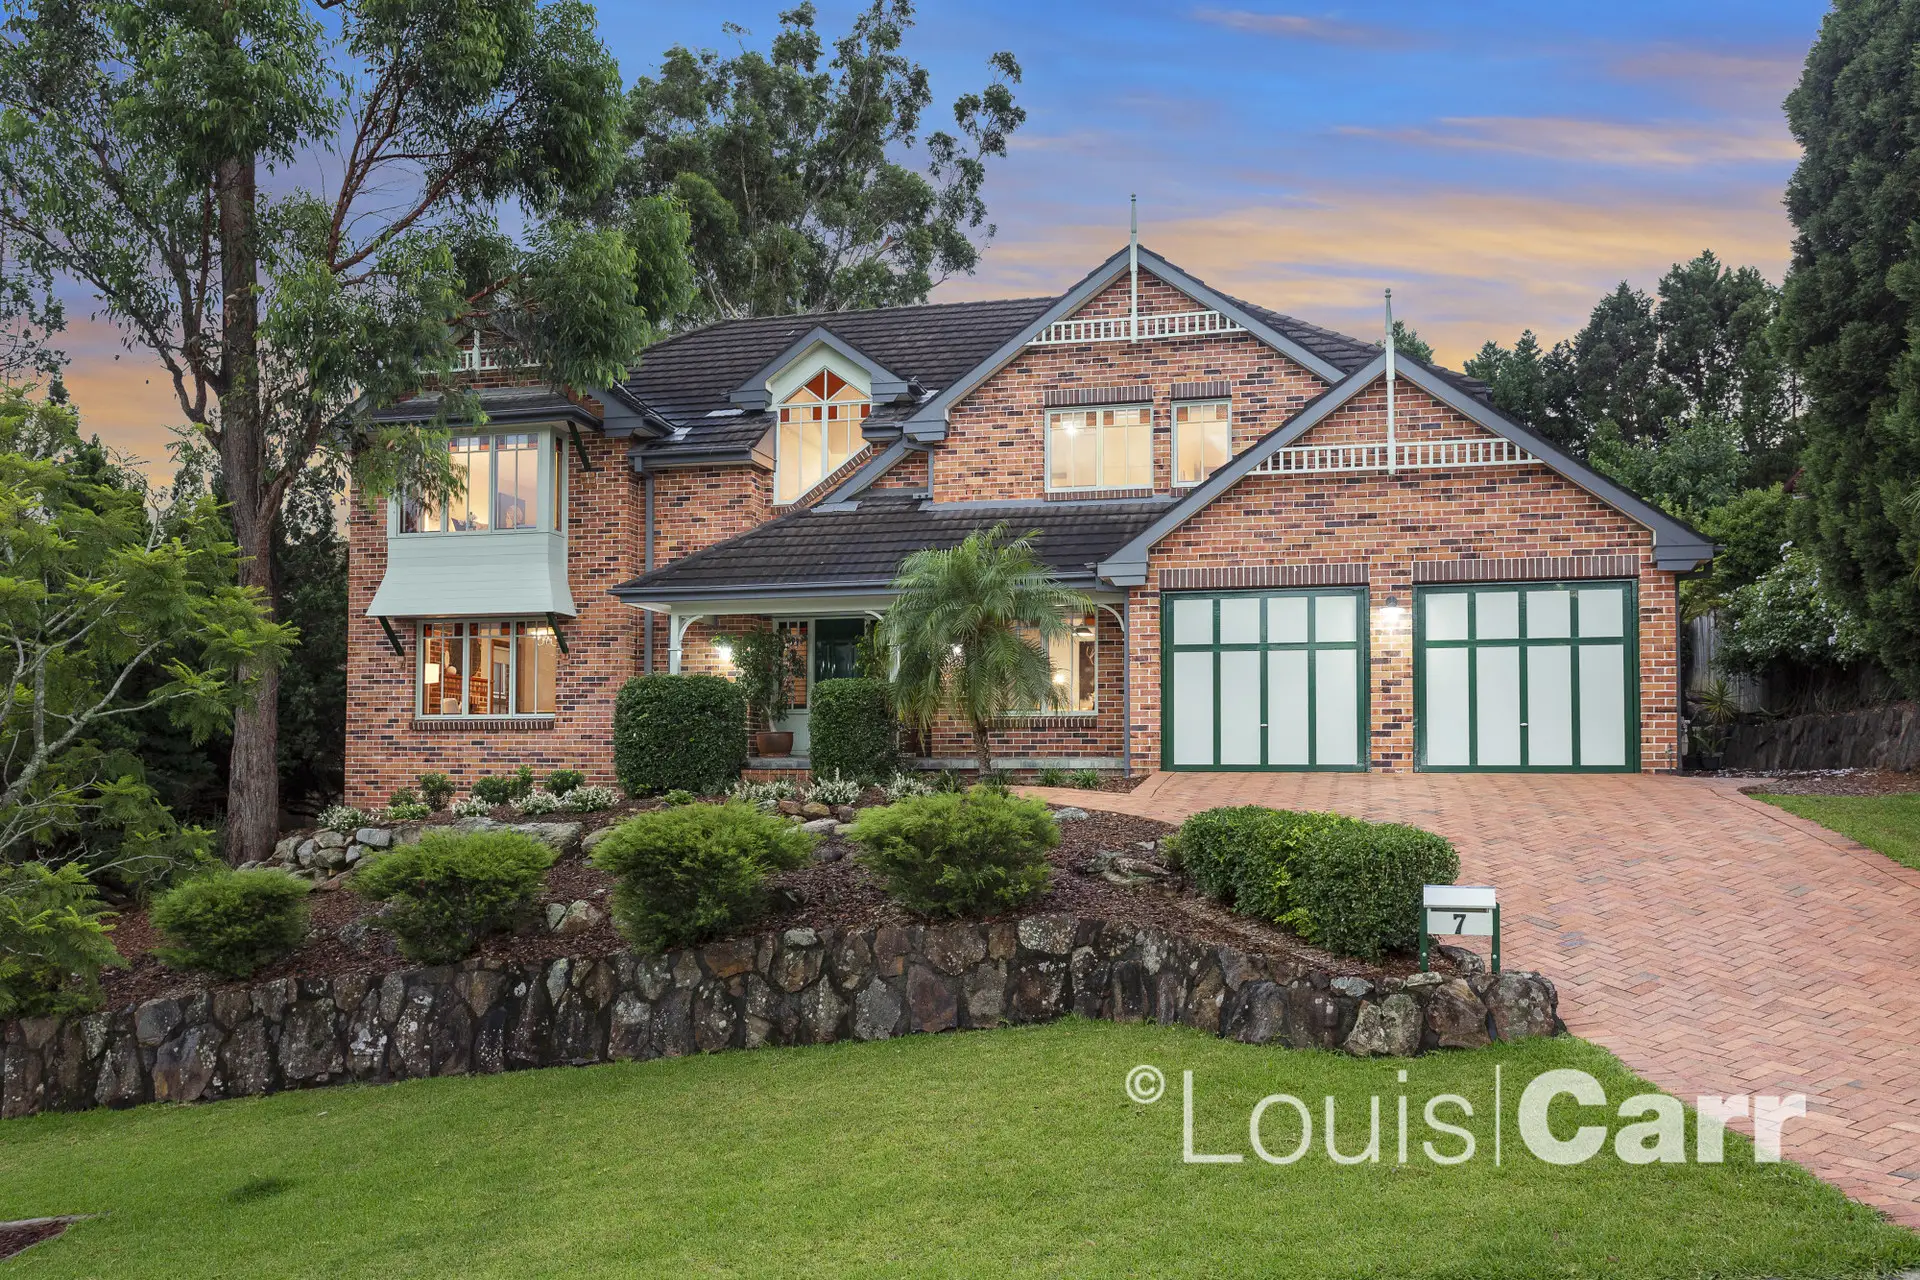 Photo #1: 7 Tambaroora Place, West Pennant Hills - Sold by Louis Carr Real Estate